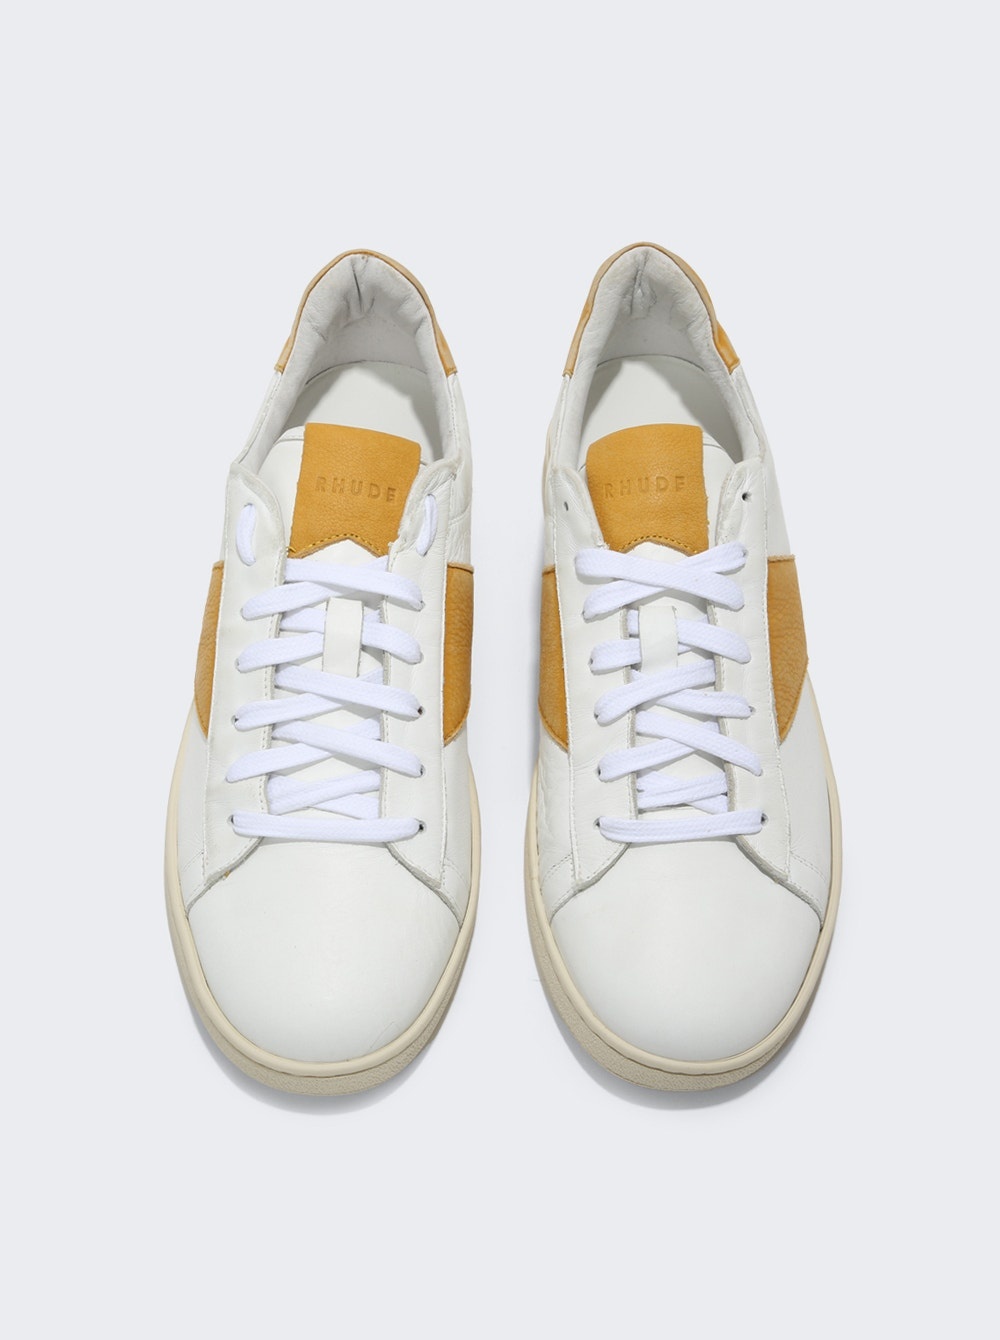 Court Low Top Sneakers White and Mustard - 4